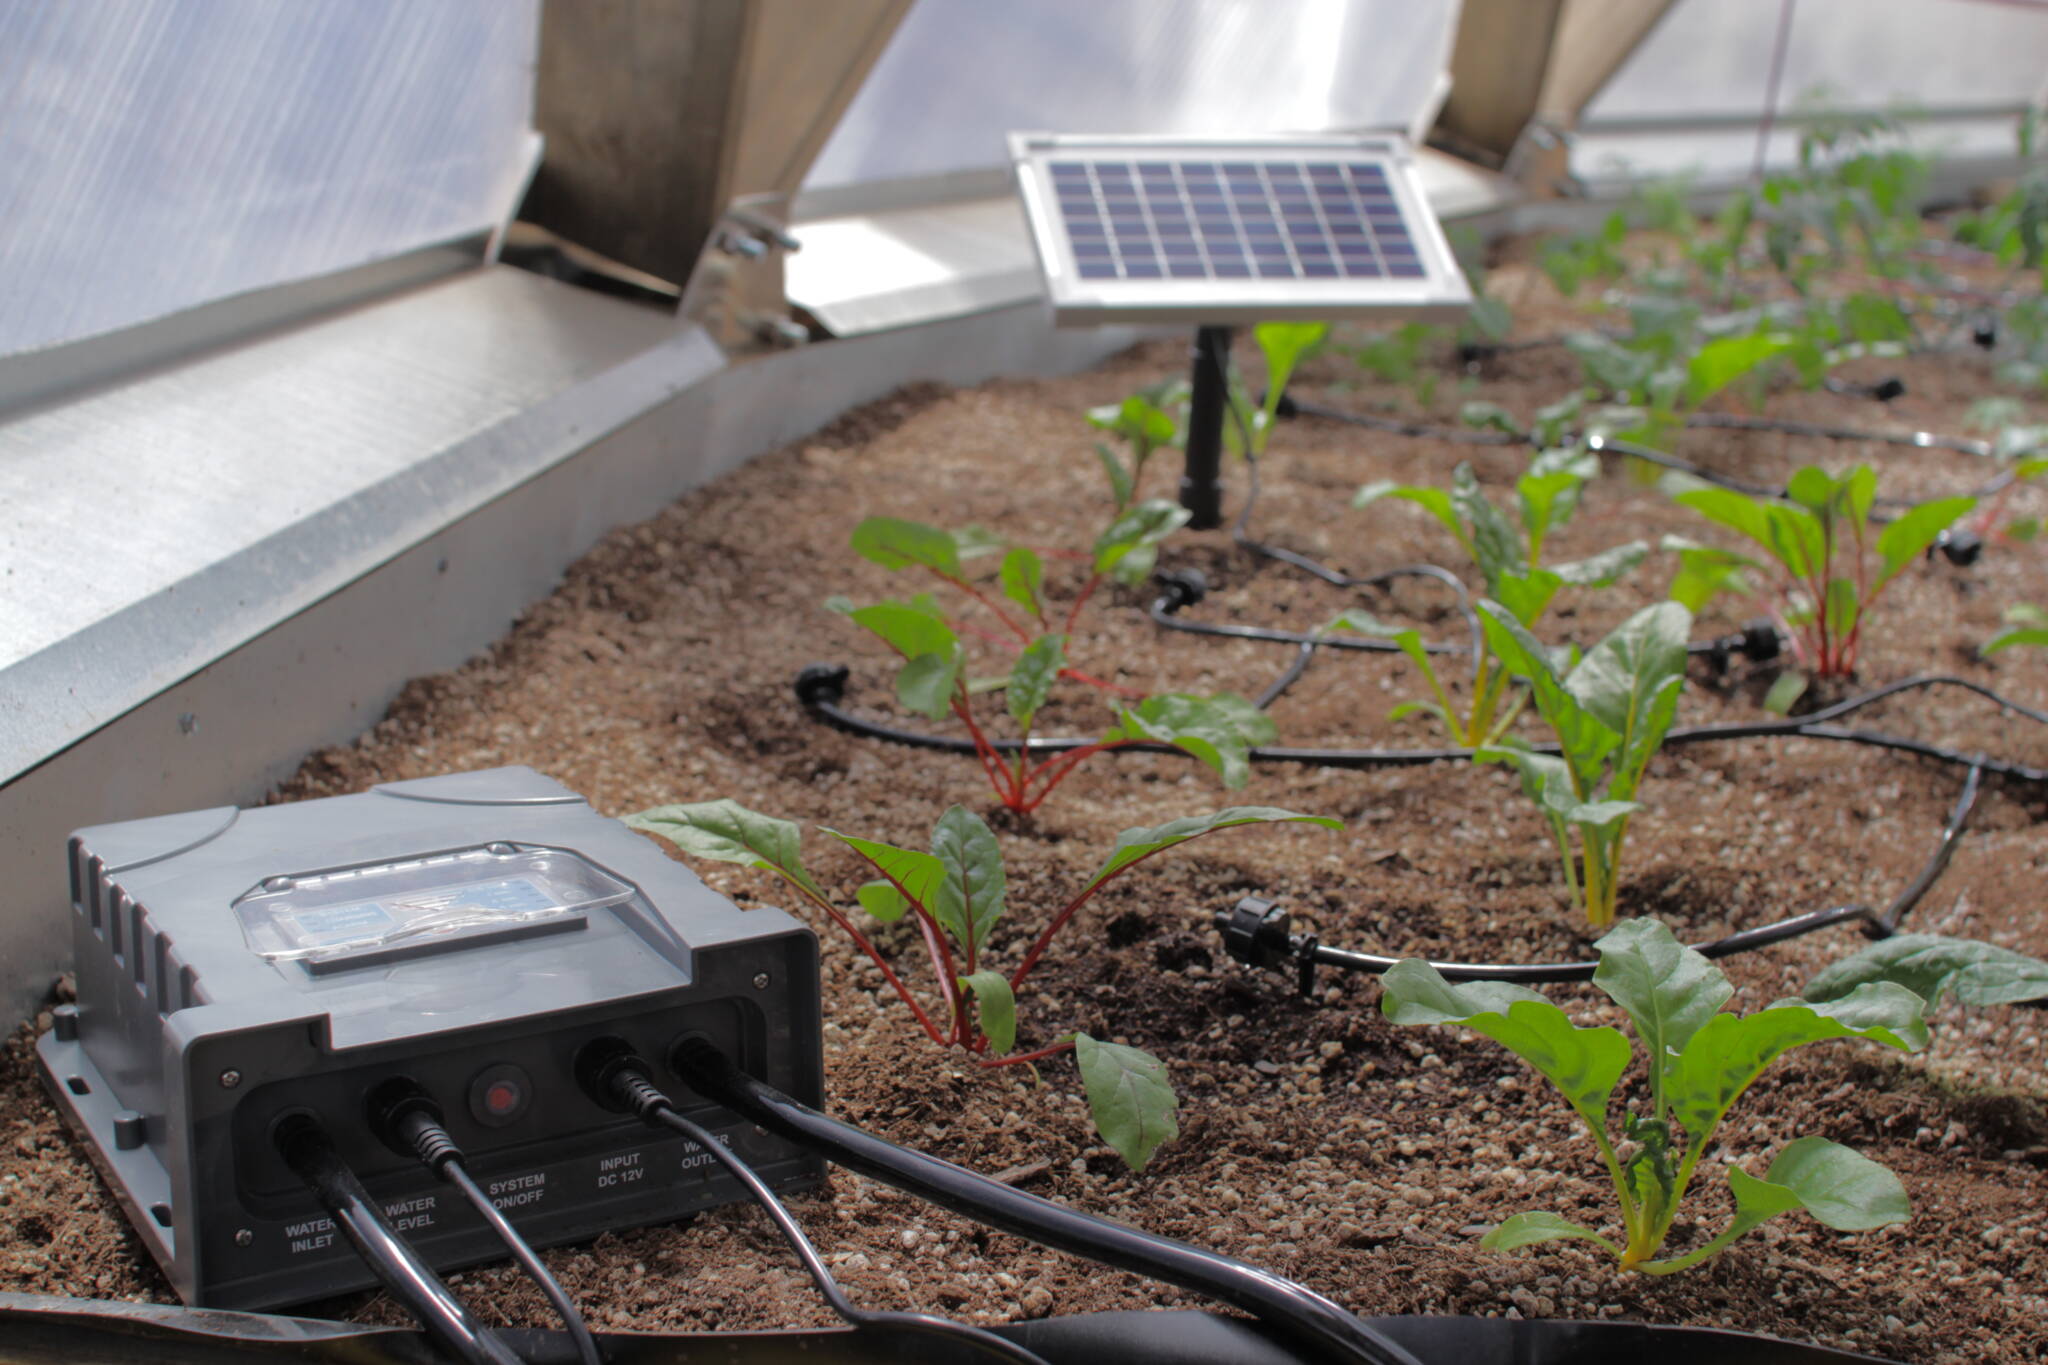 Automatic solar powered drip irrigation system in growing dome greenhouse